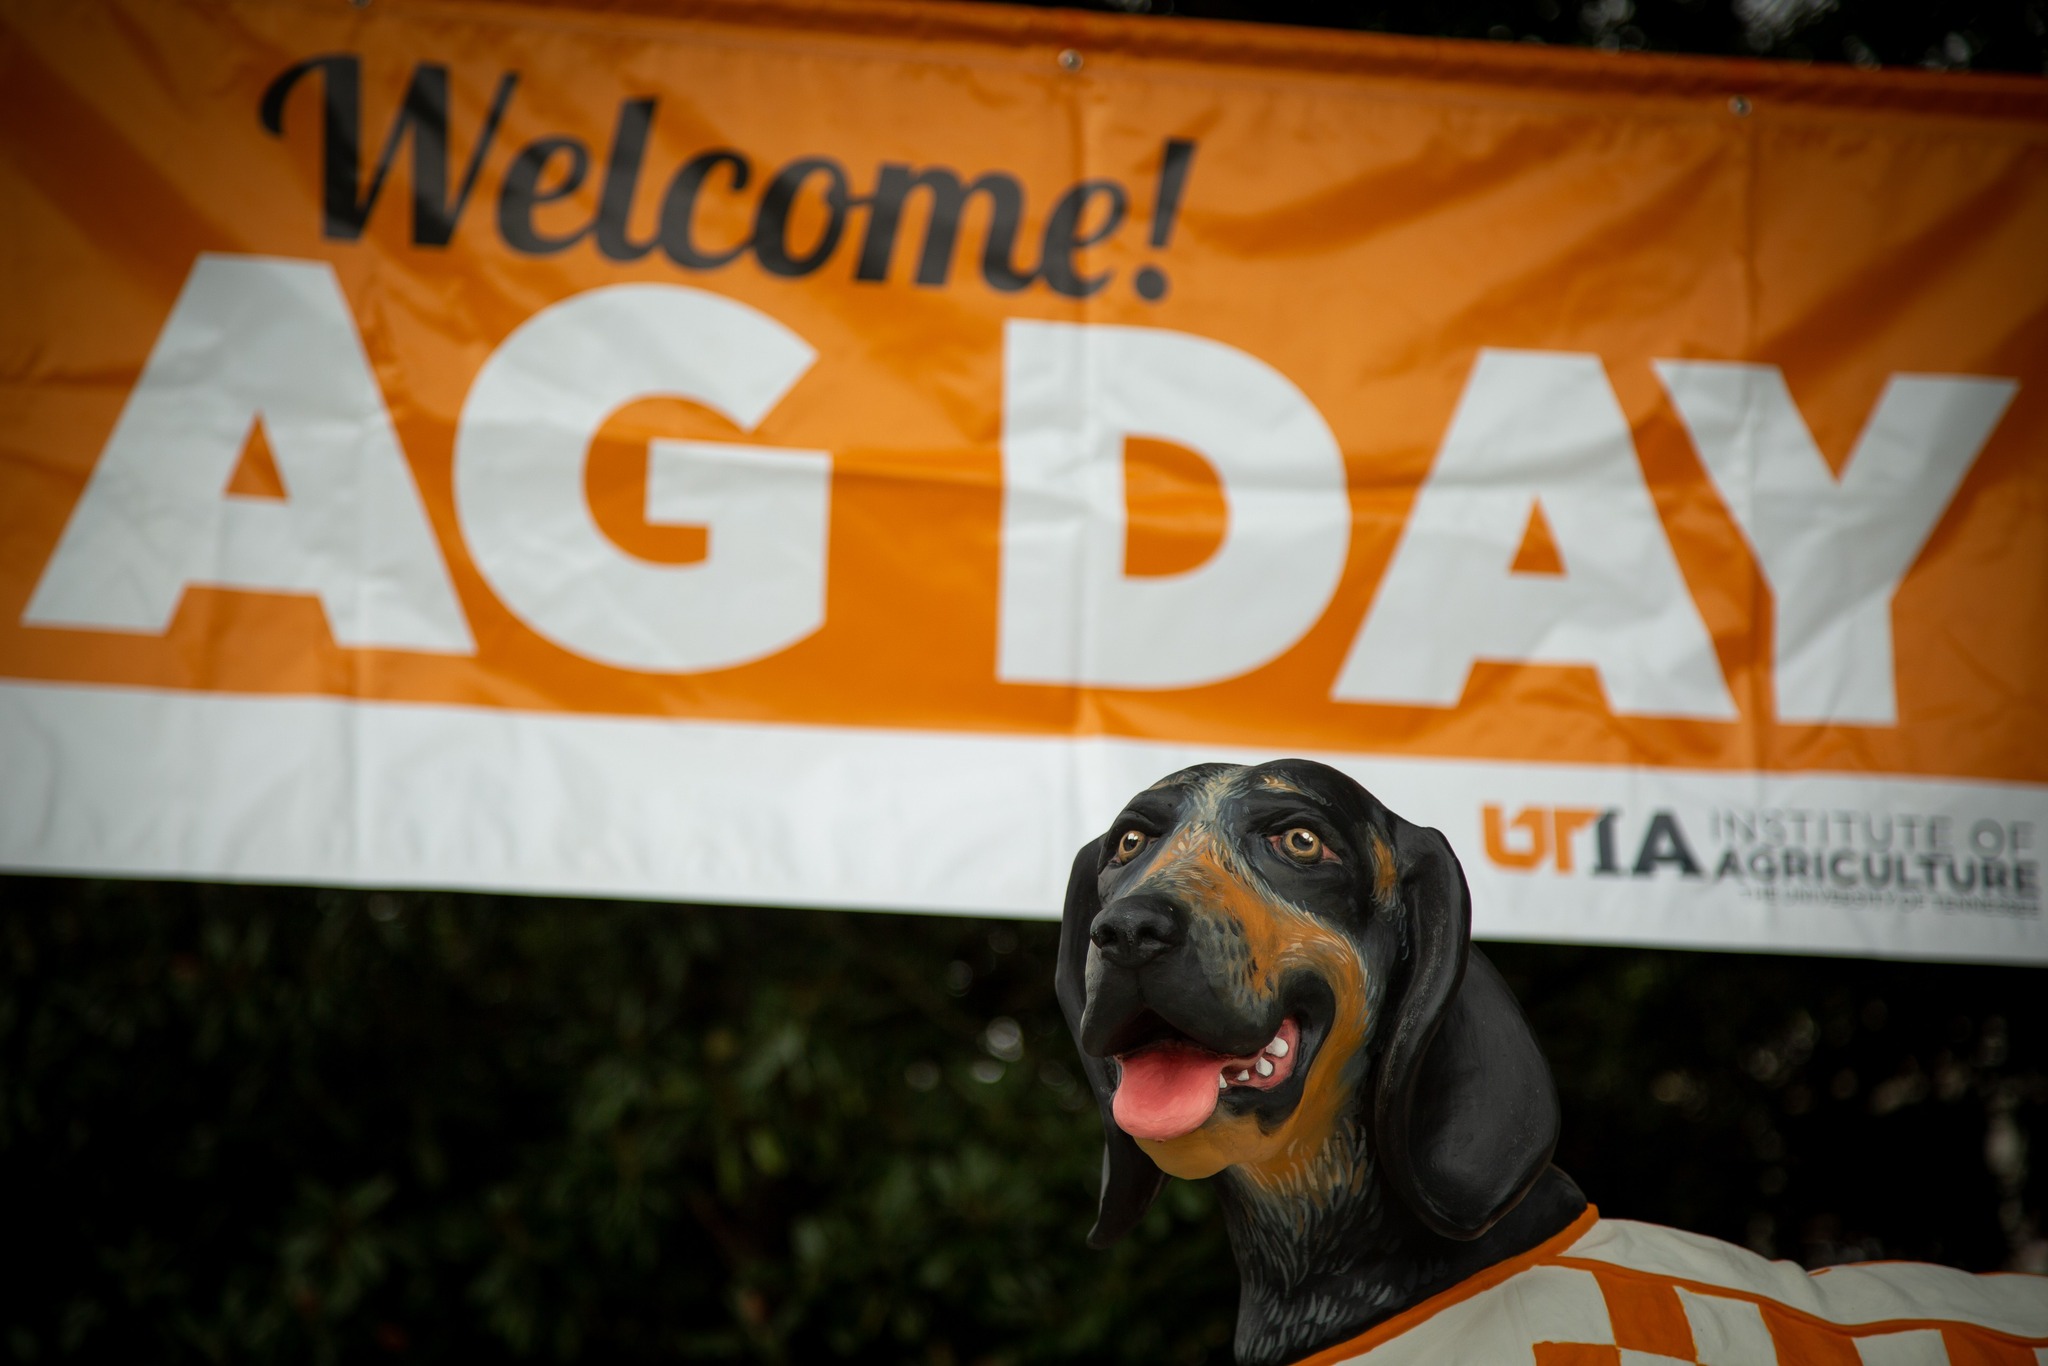 Smoky with banner in background. Welcome! Ag Day.